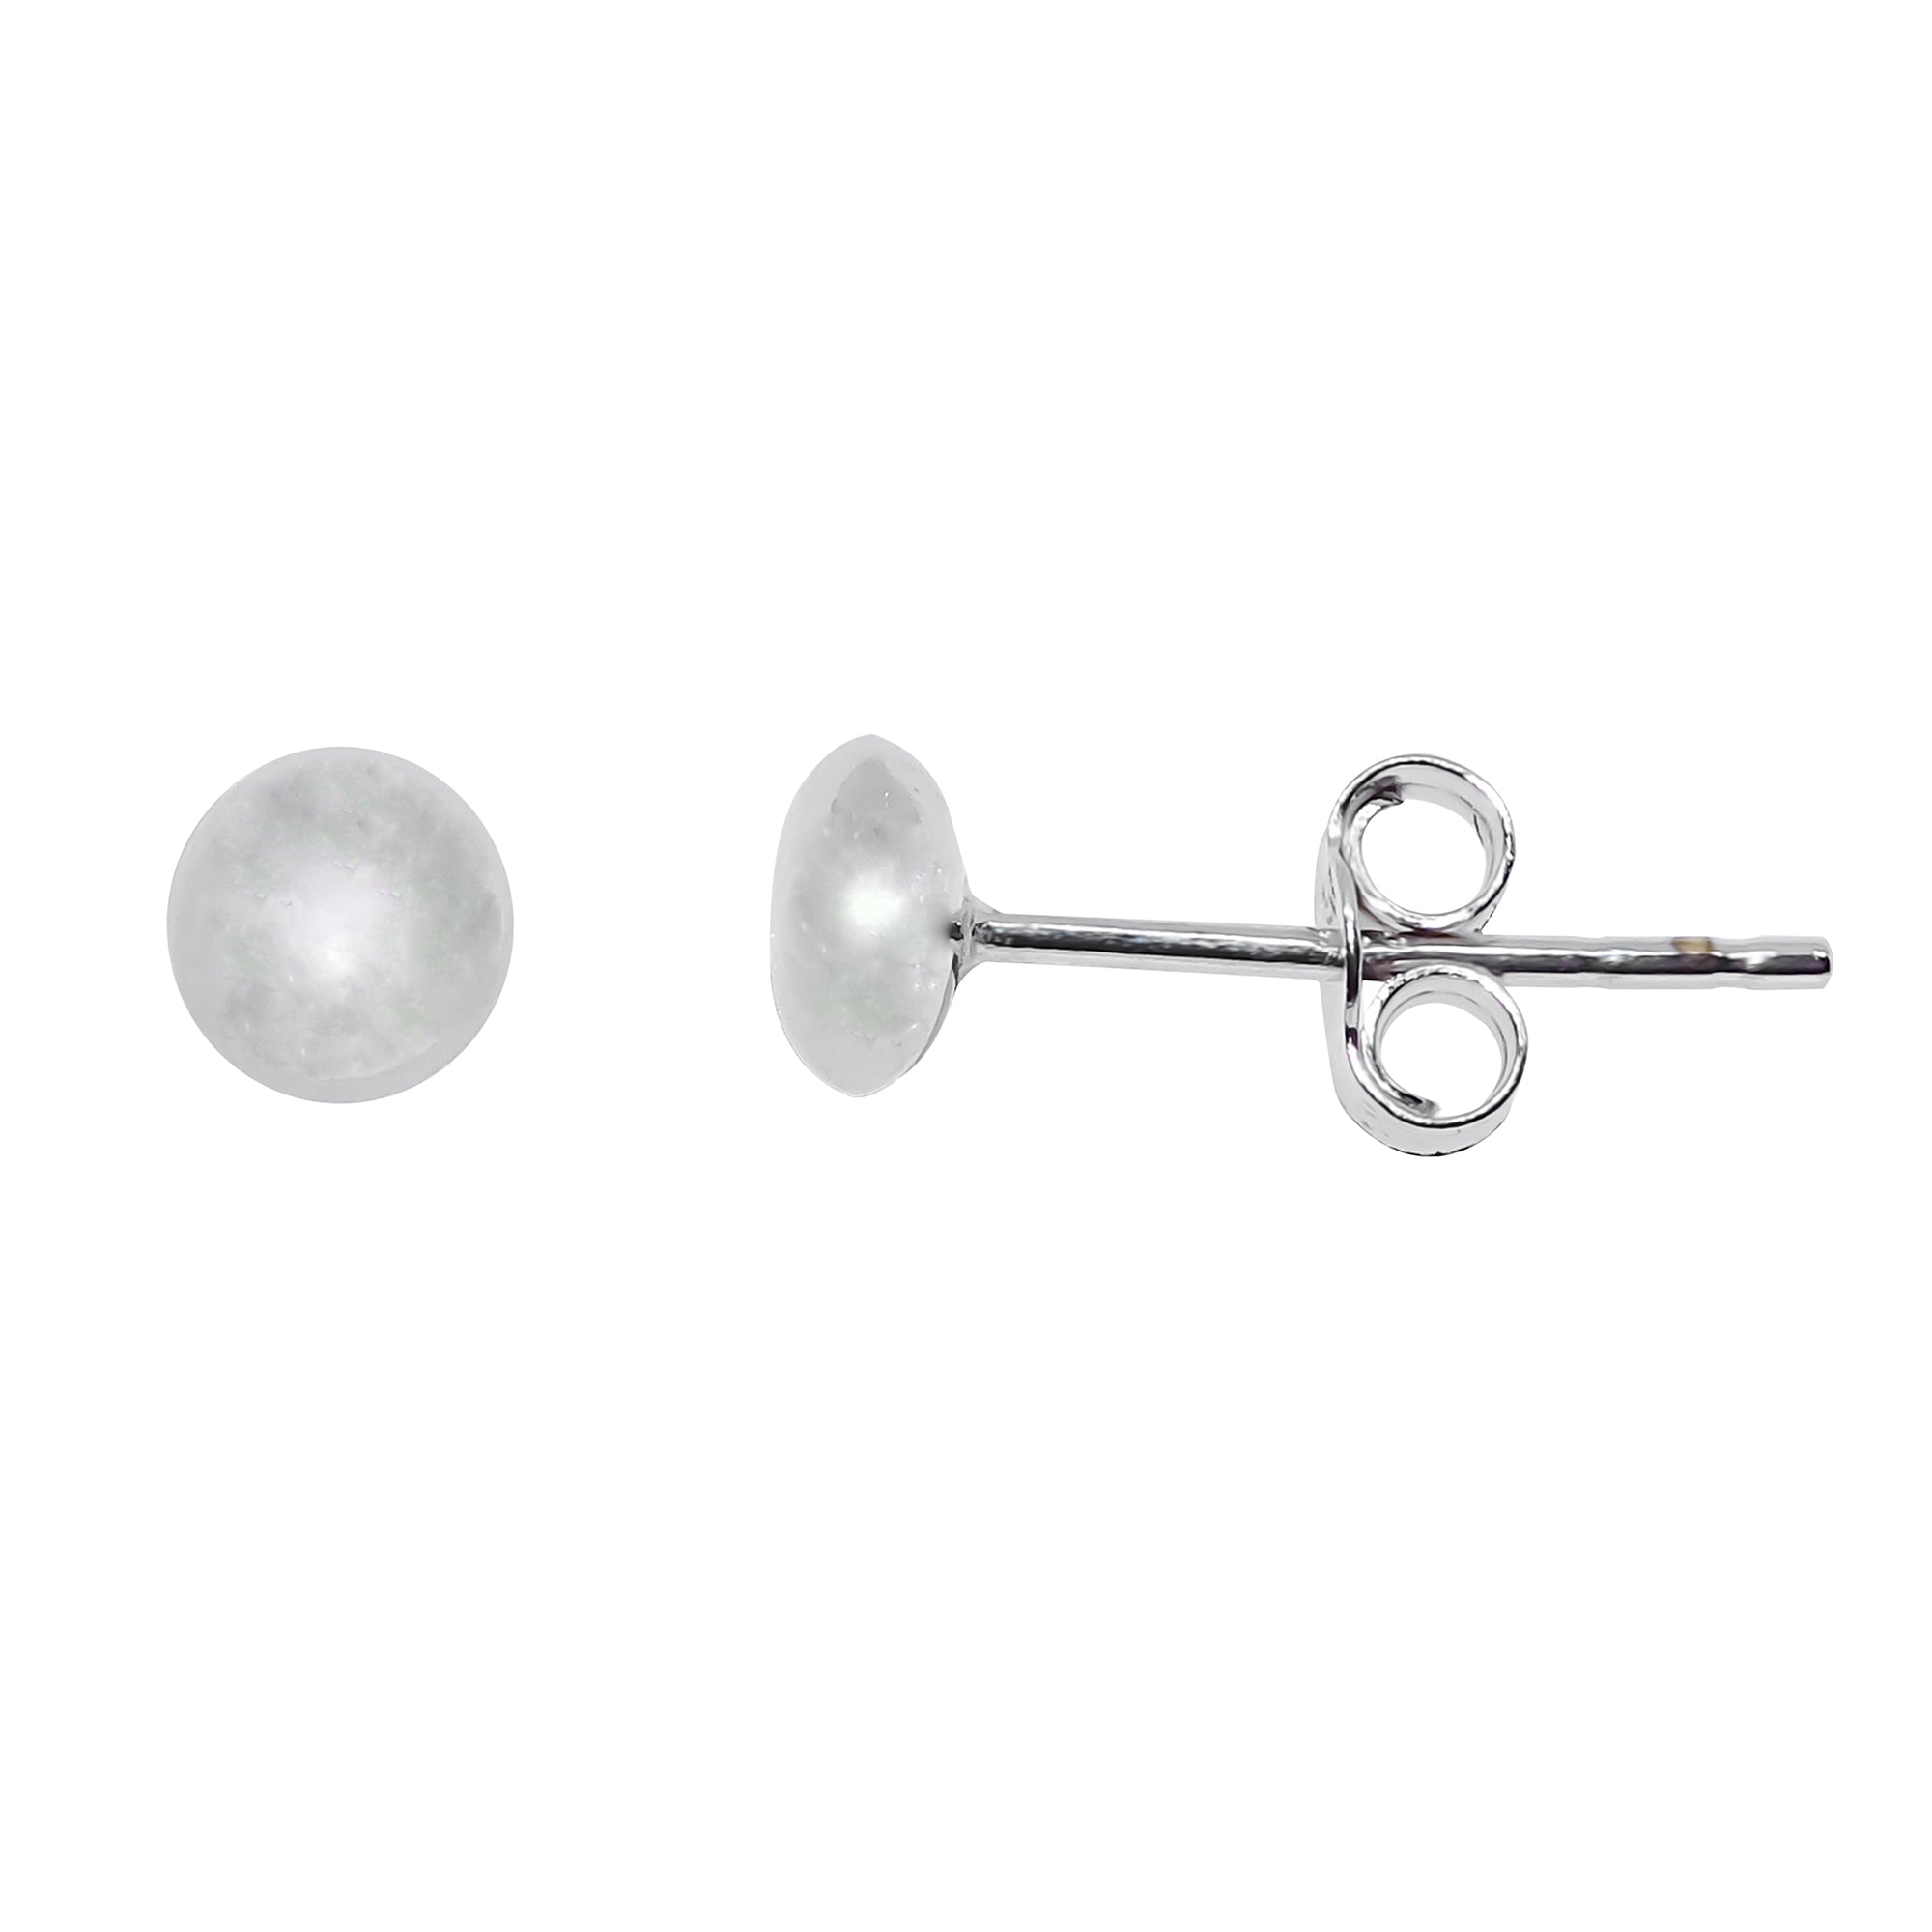 9ct white gold 4mm bouton stud earrings